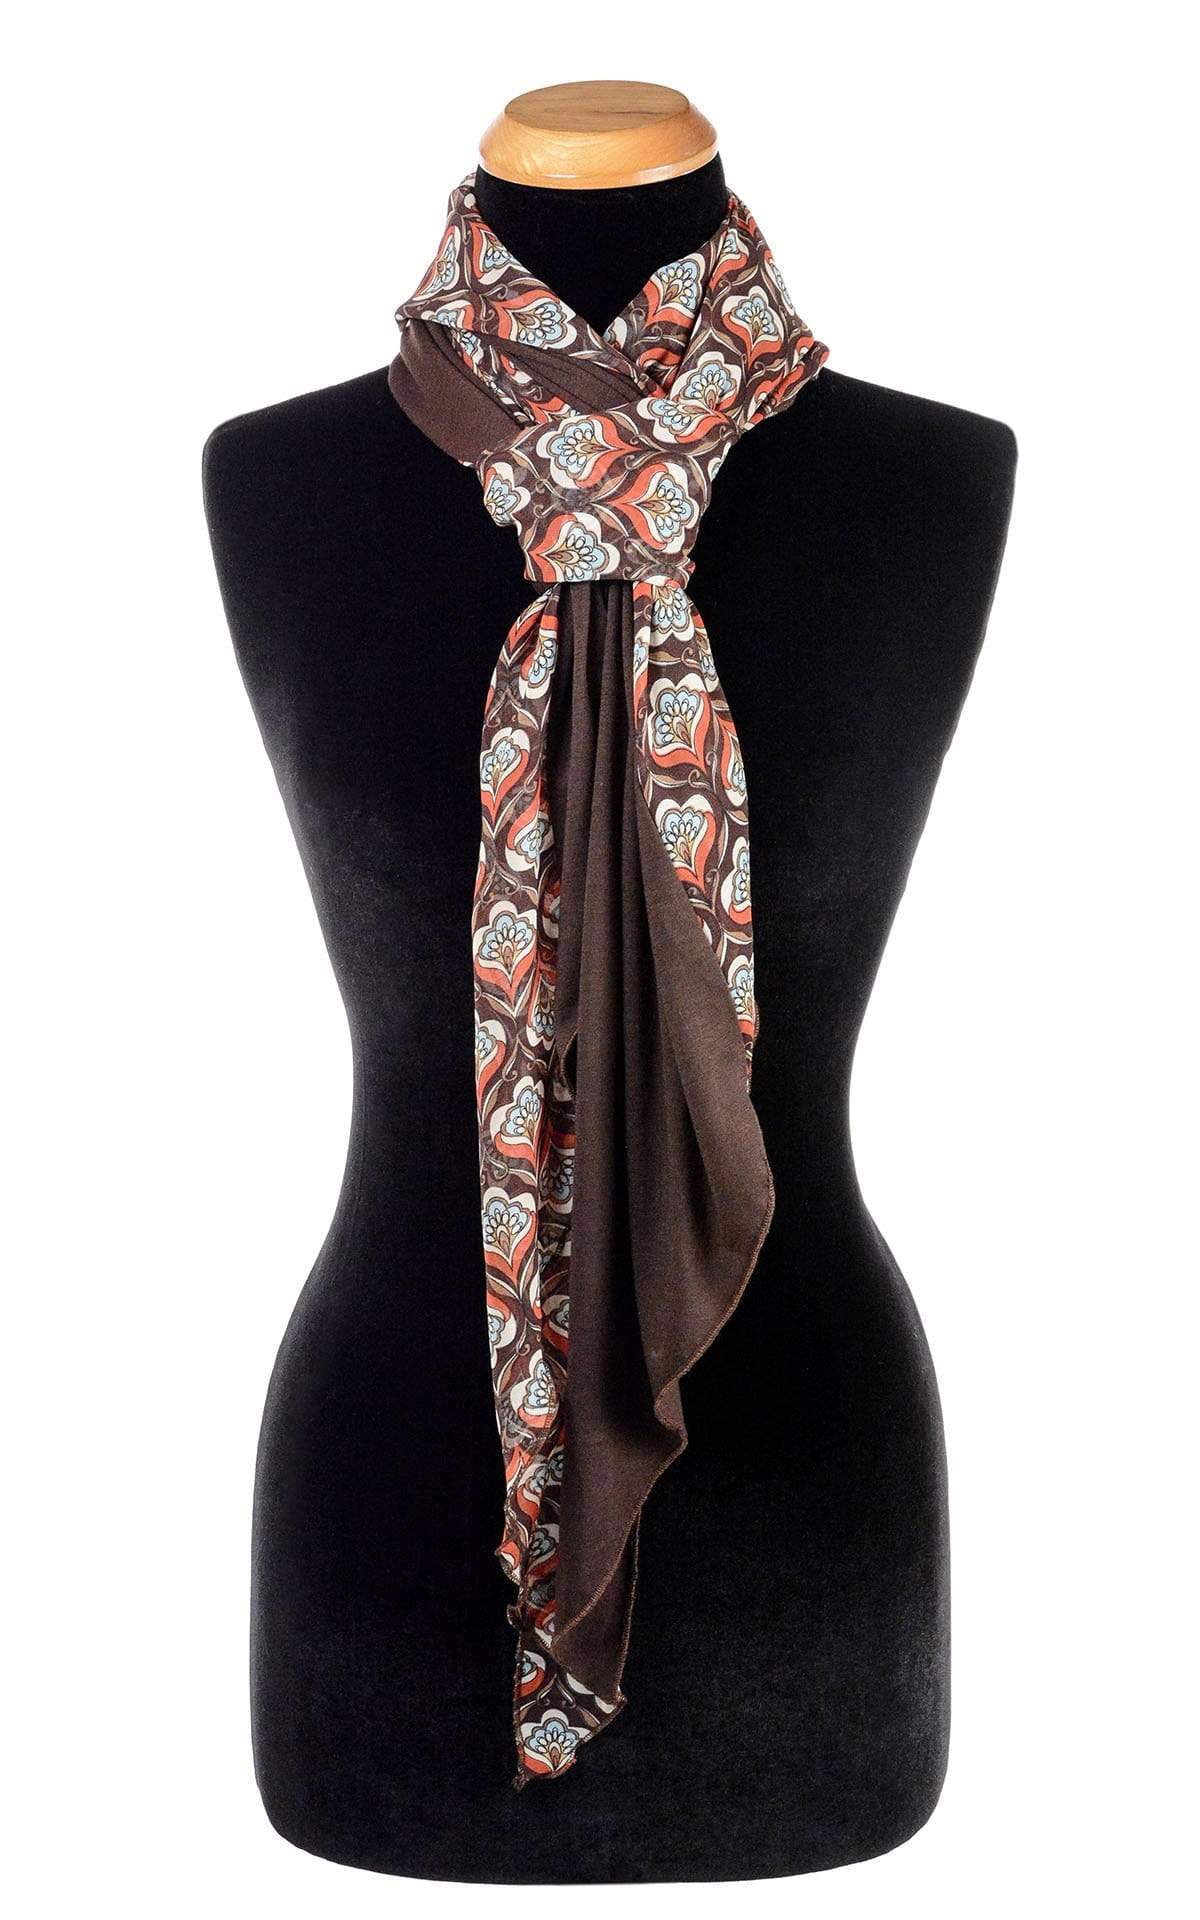  Ladies Two-Tone Handkerchief Scarf, Large Wrap | Shown in Multi Mod  (brown, blue, rust and cream)   print on Chiffon with Chocolate Jersey Knit | Handmade in Seattle WA | Pandemonium Millinery